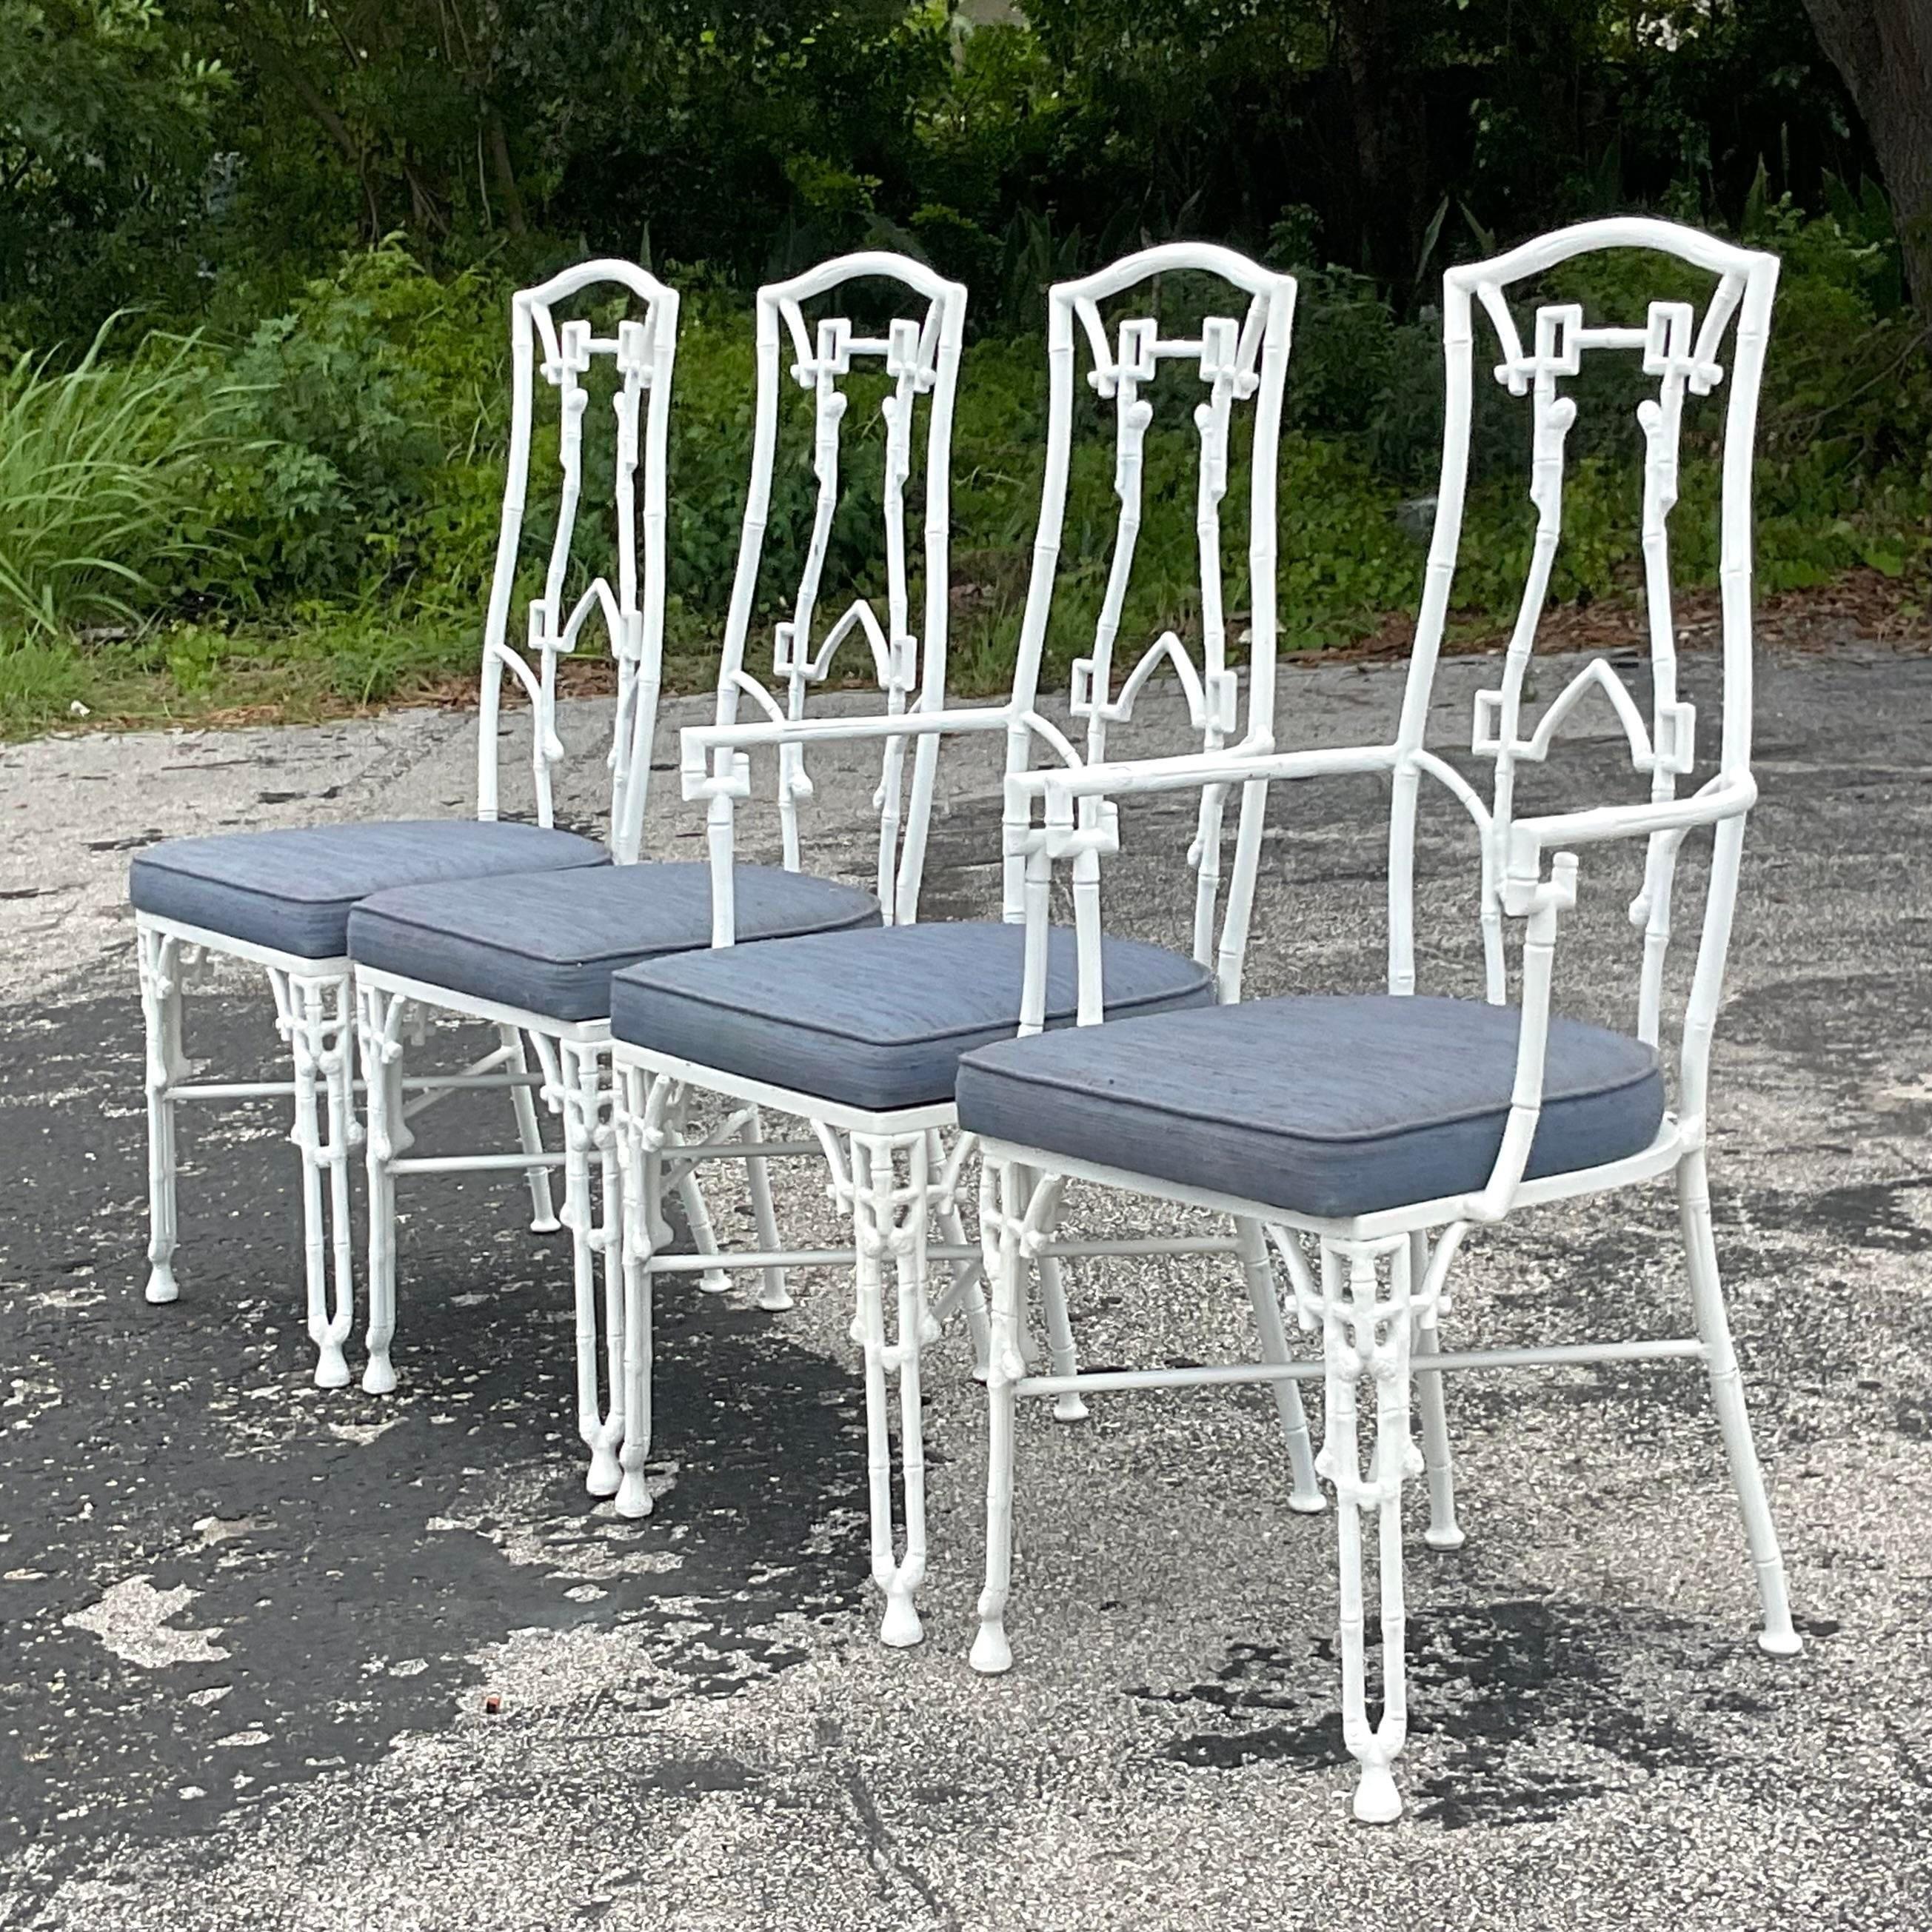 Set of 4 midcentury cast aluminum dining chairs. Hollywood regency faux bamboo detail, with open fretwork design. Done in the manner of Kessler Industries. Matching table also available on my page. Acquired from a Palm Beach estate.

Seat height